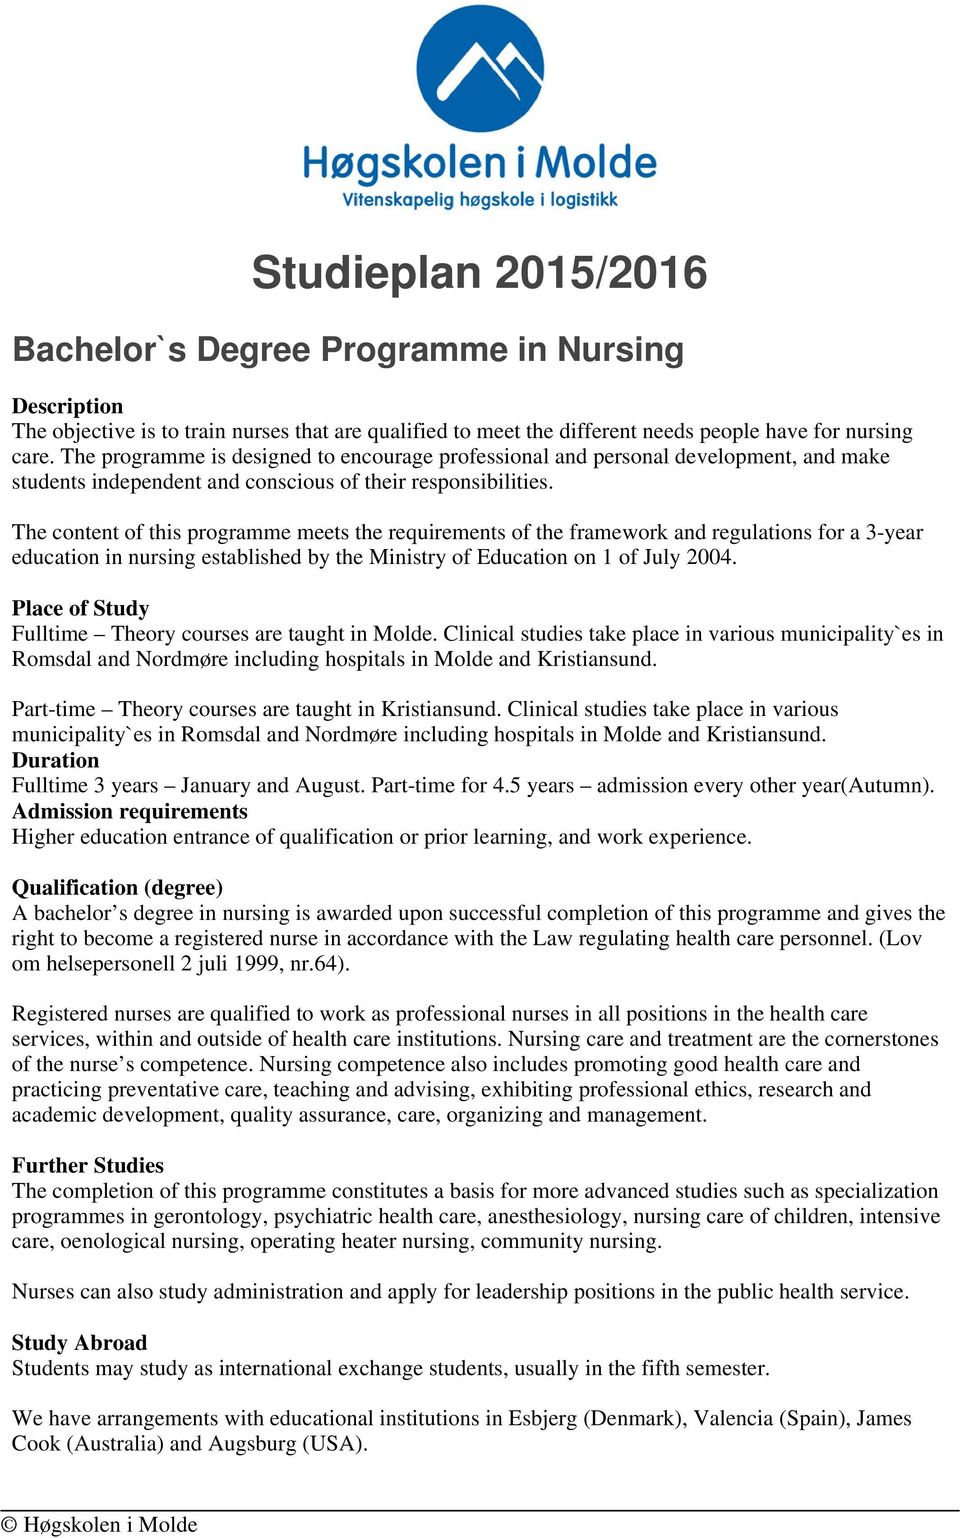 The content of this programme meets the requirements of the framework and regulations for a 3-year education in nursing established by the Ministry of Education on 1 of July 2004.